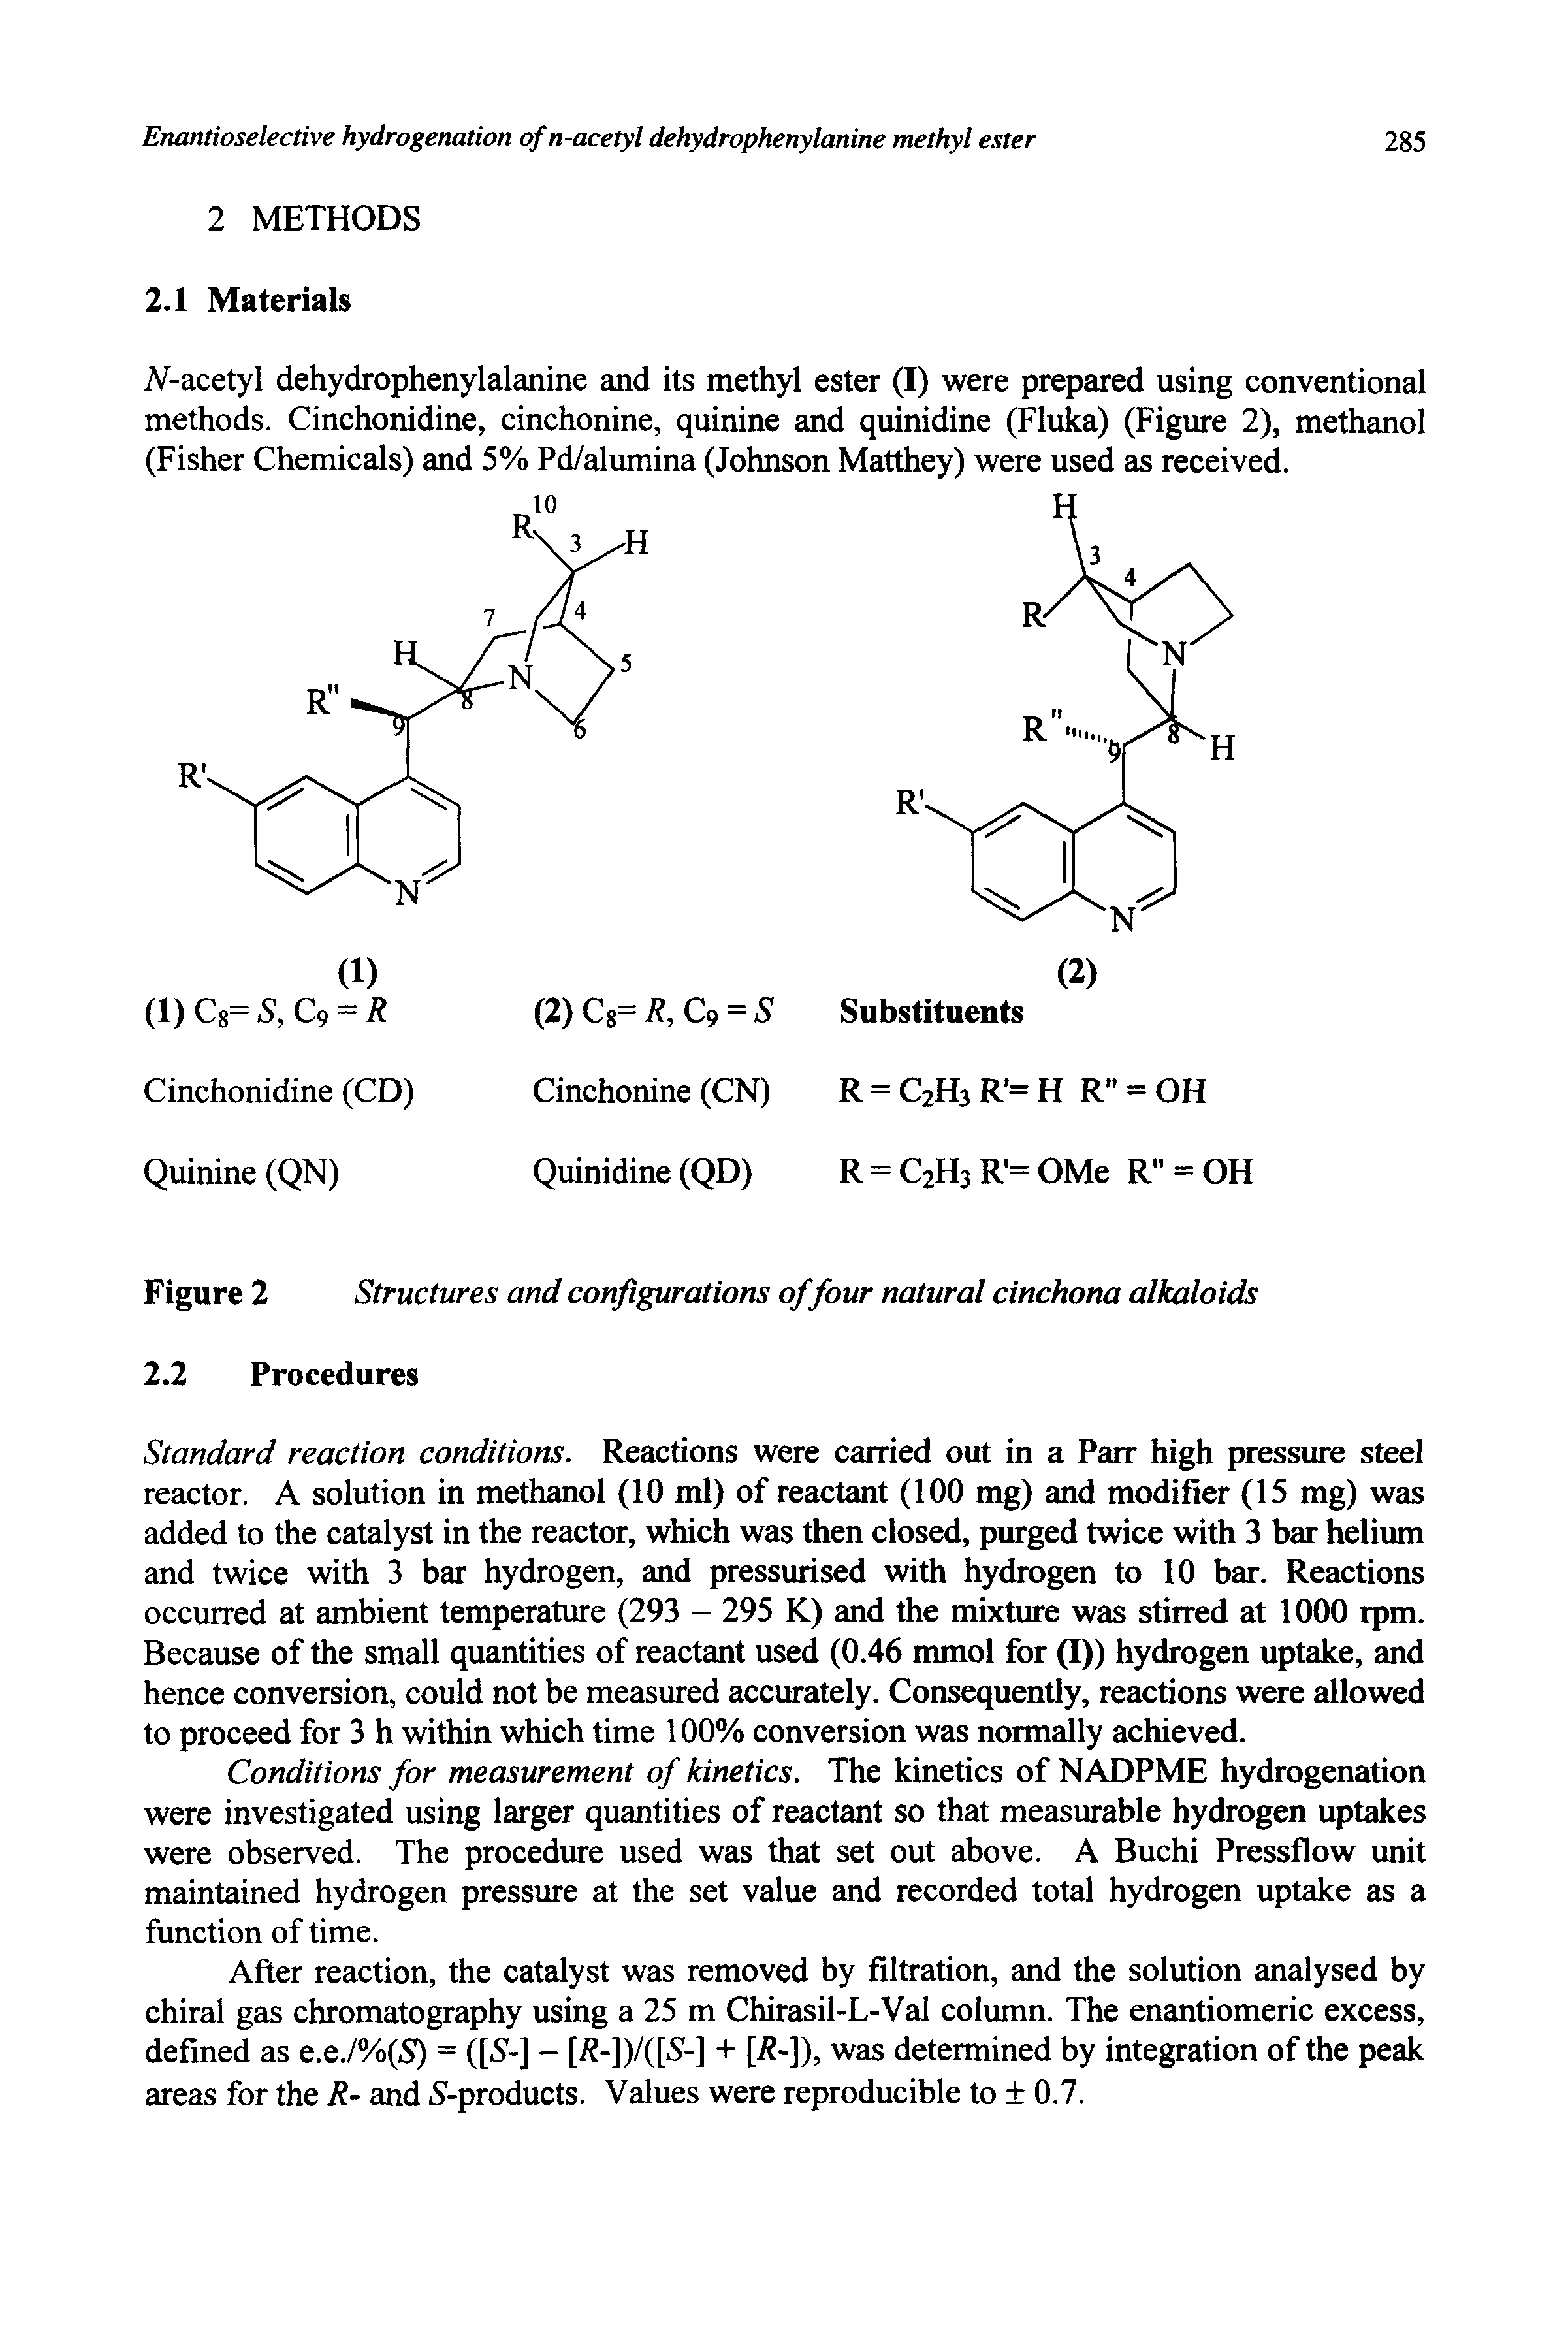 Figure 2 Structures and configurations of four natural cinchona alkaloids...